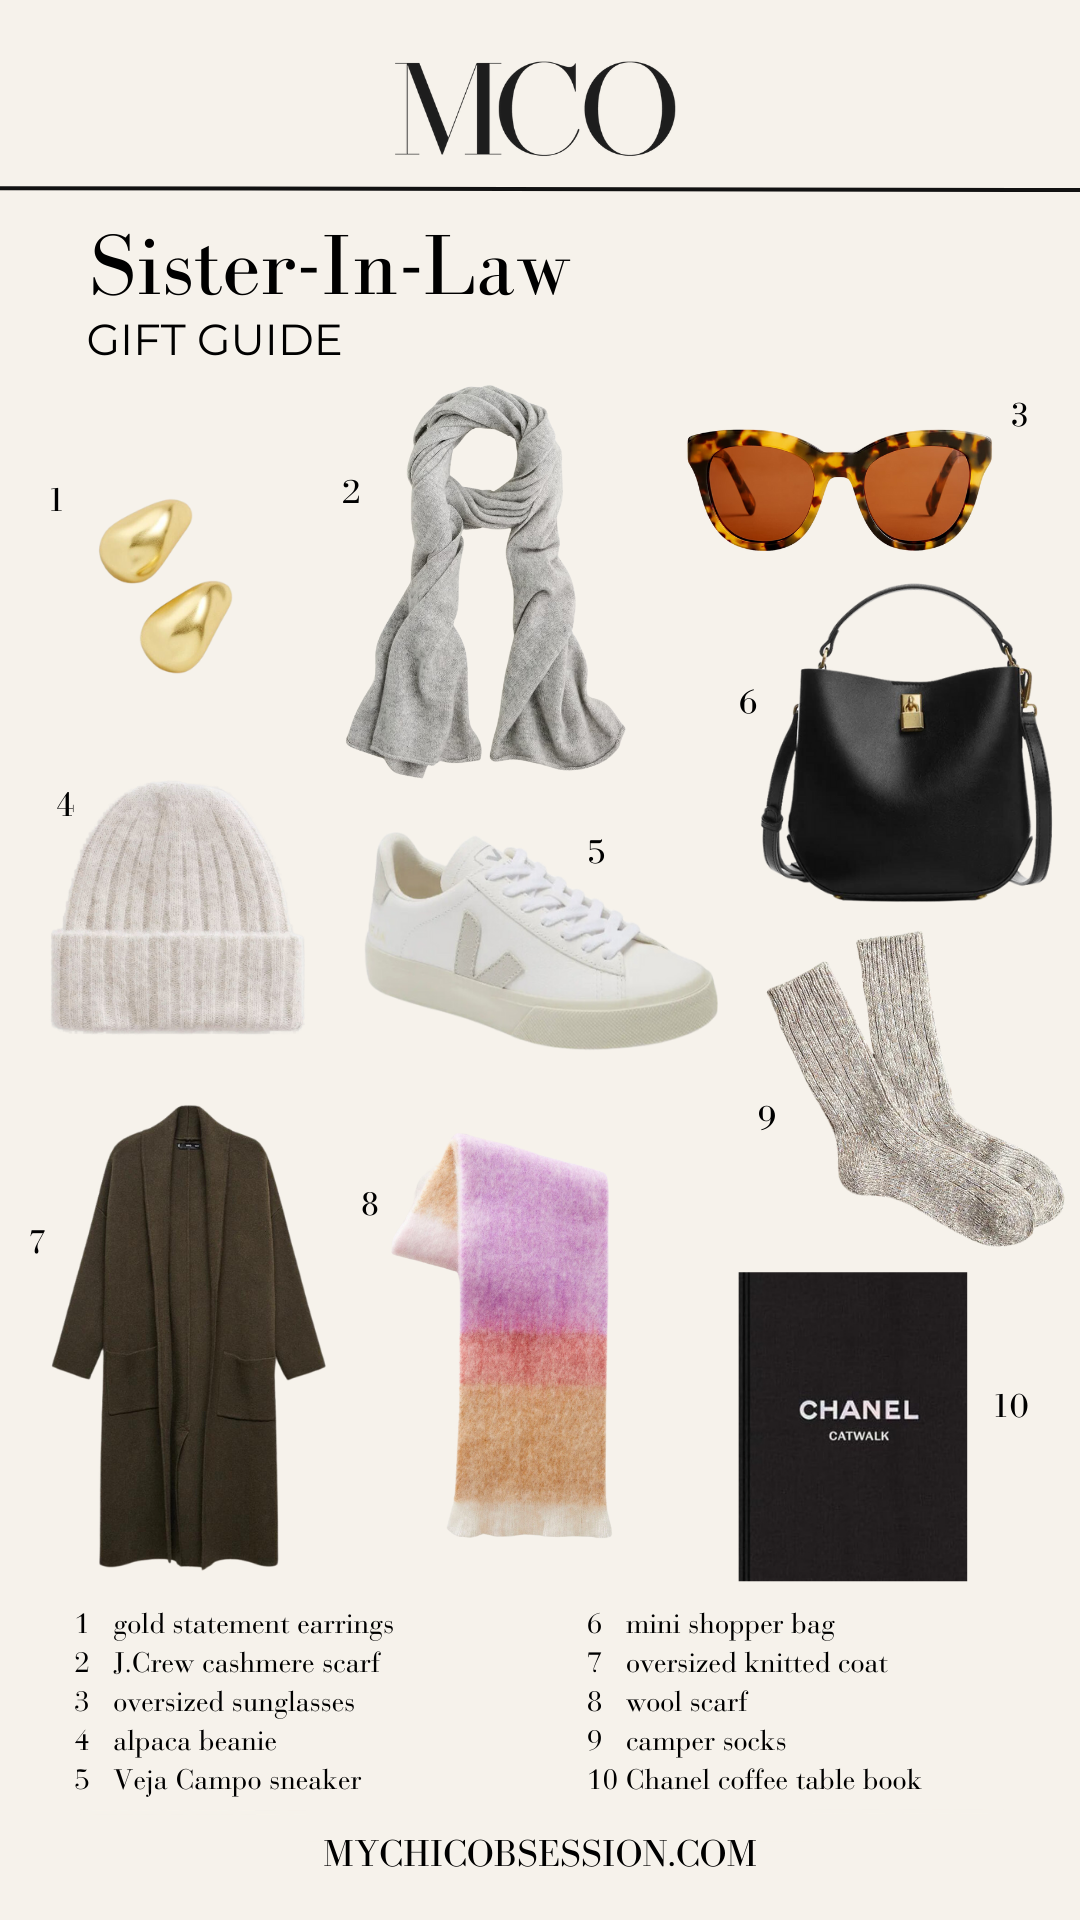 10 Christmas gift ideas for your sister-in-law who loves fashion